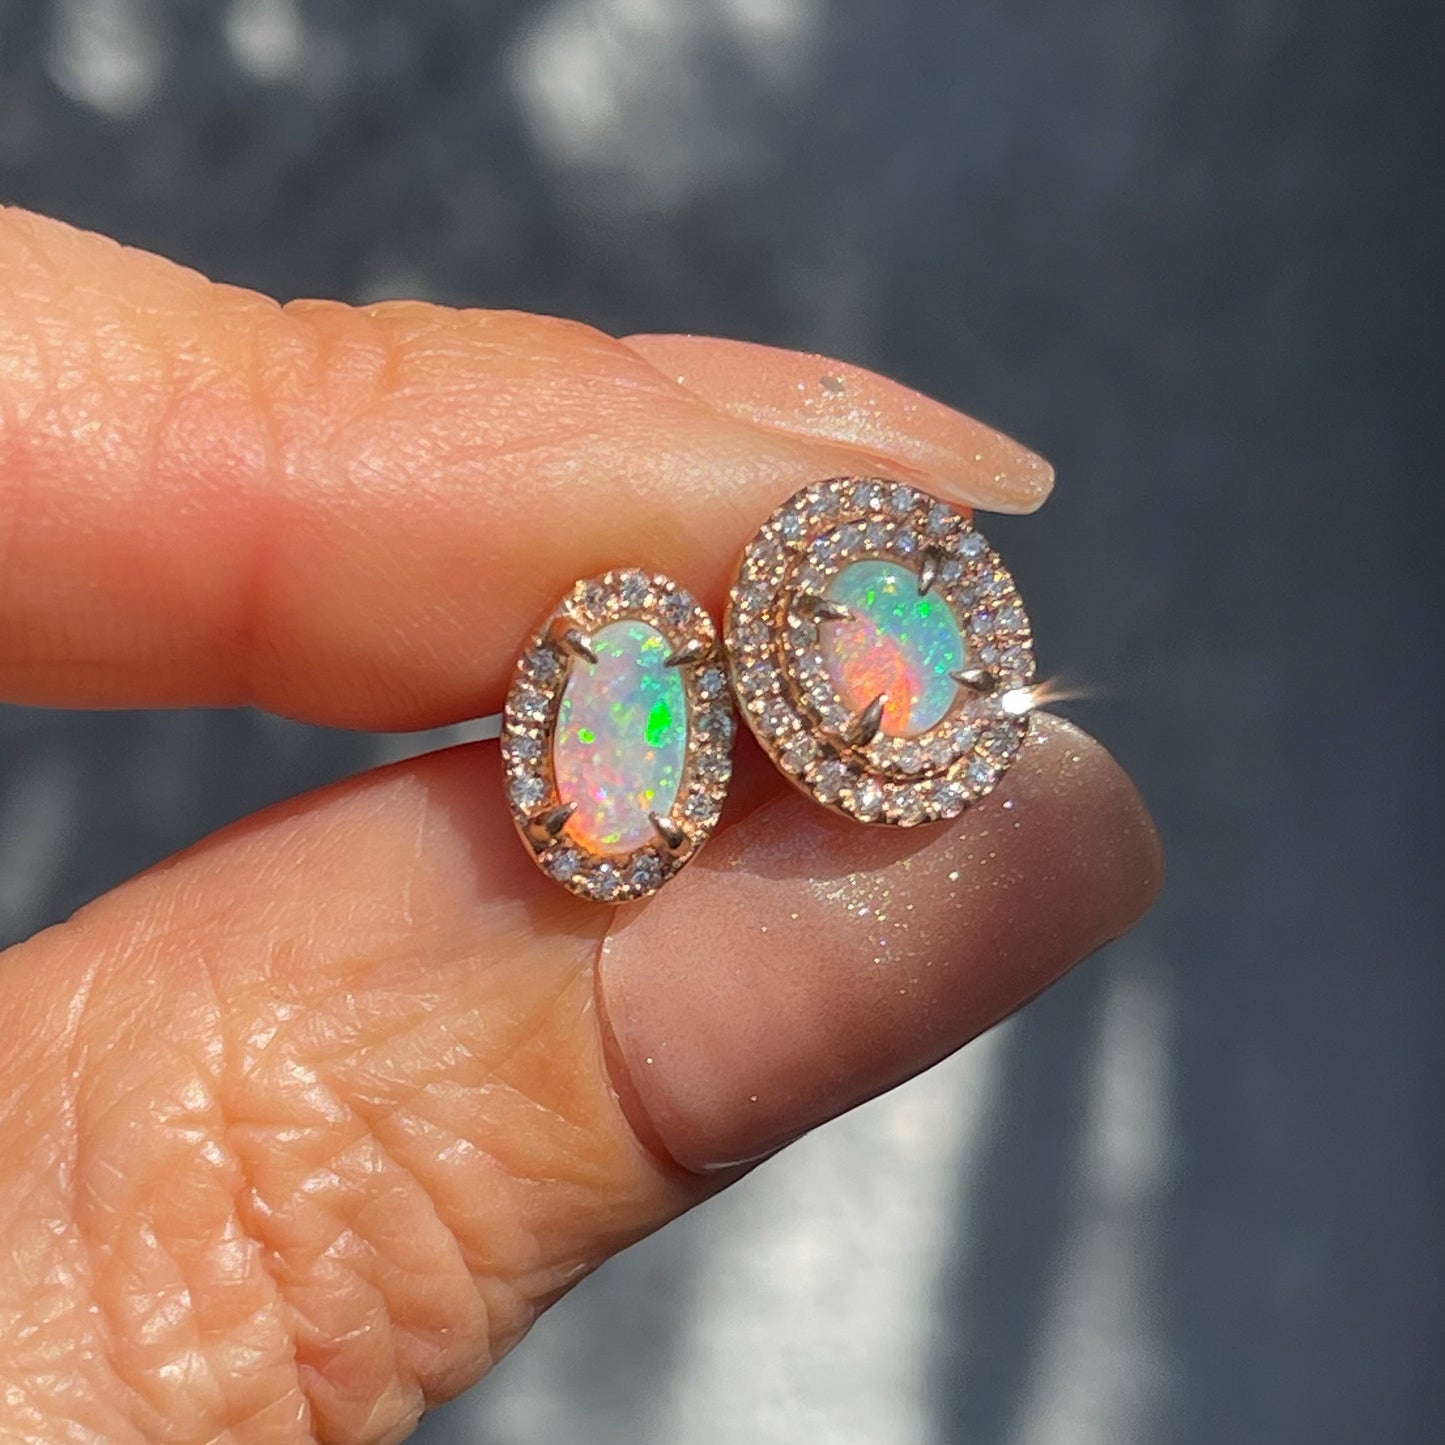 A pair of Australian Opal Earrings by NIXIN Jewelry with asymmetrical opals to make mismatched earrings.